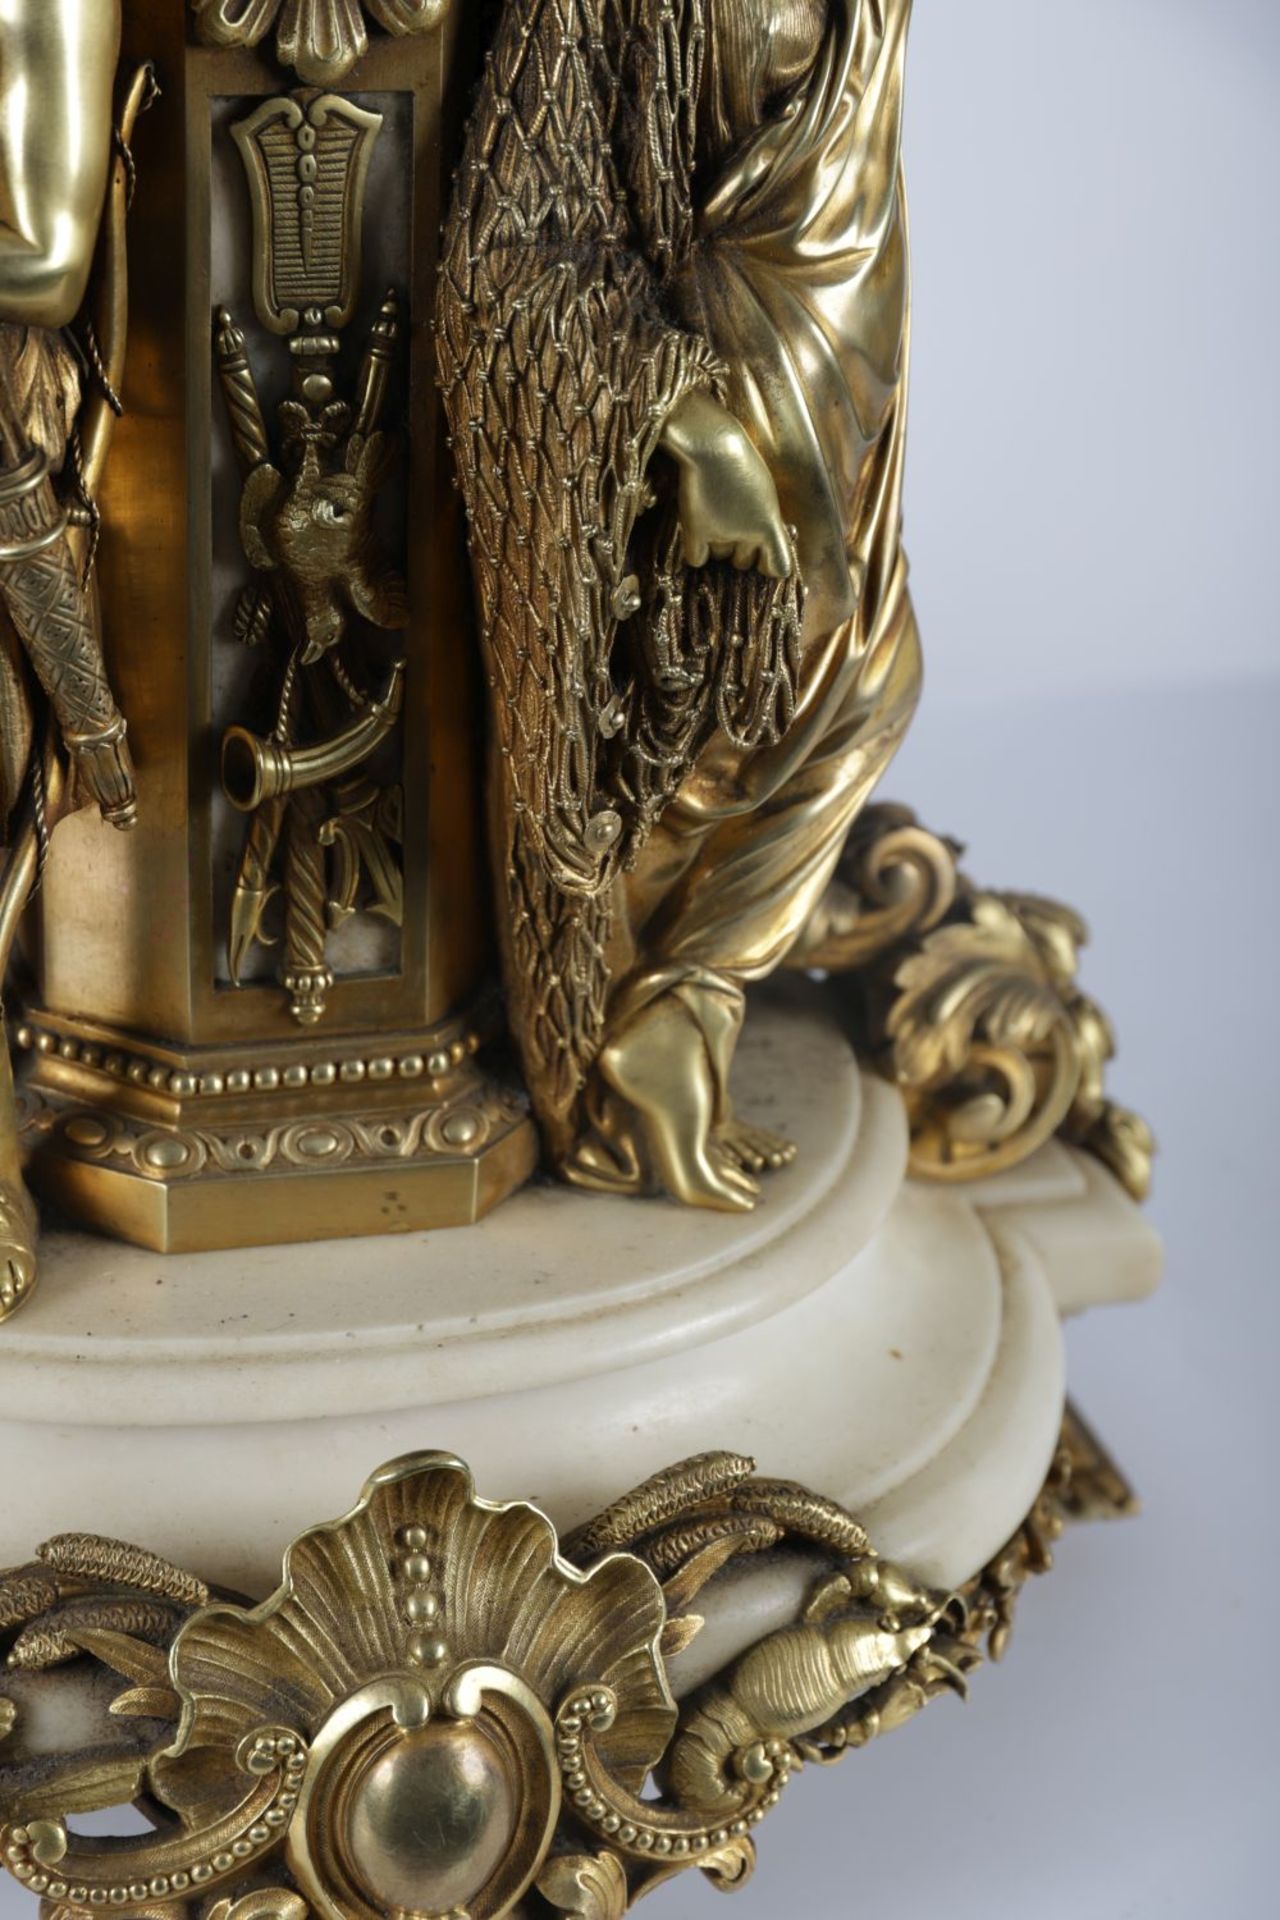 19TH-CENTURY FRENCH ORMOLU MARBLE CLOCK - Image 3 of 4